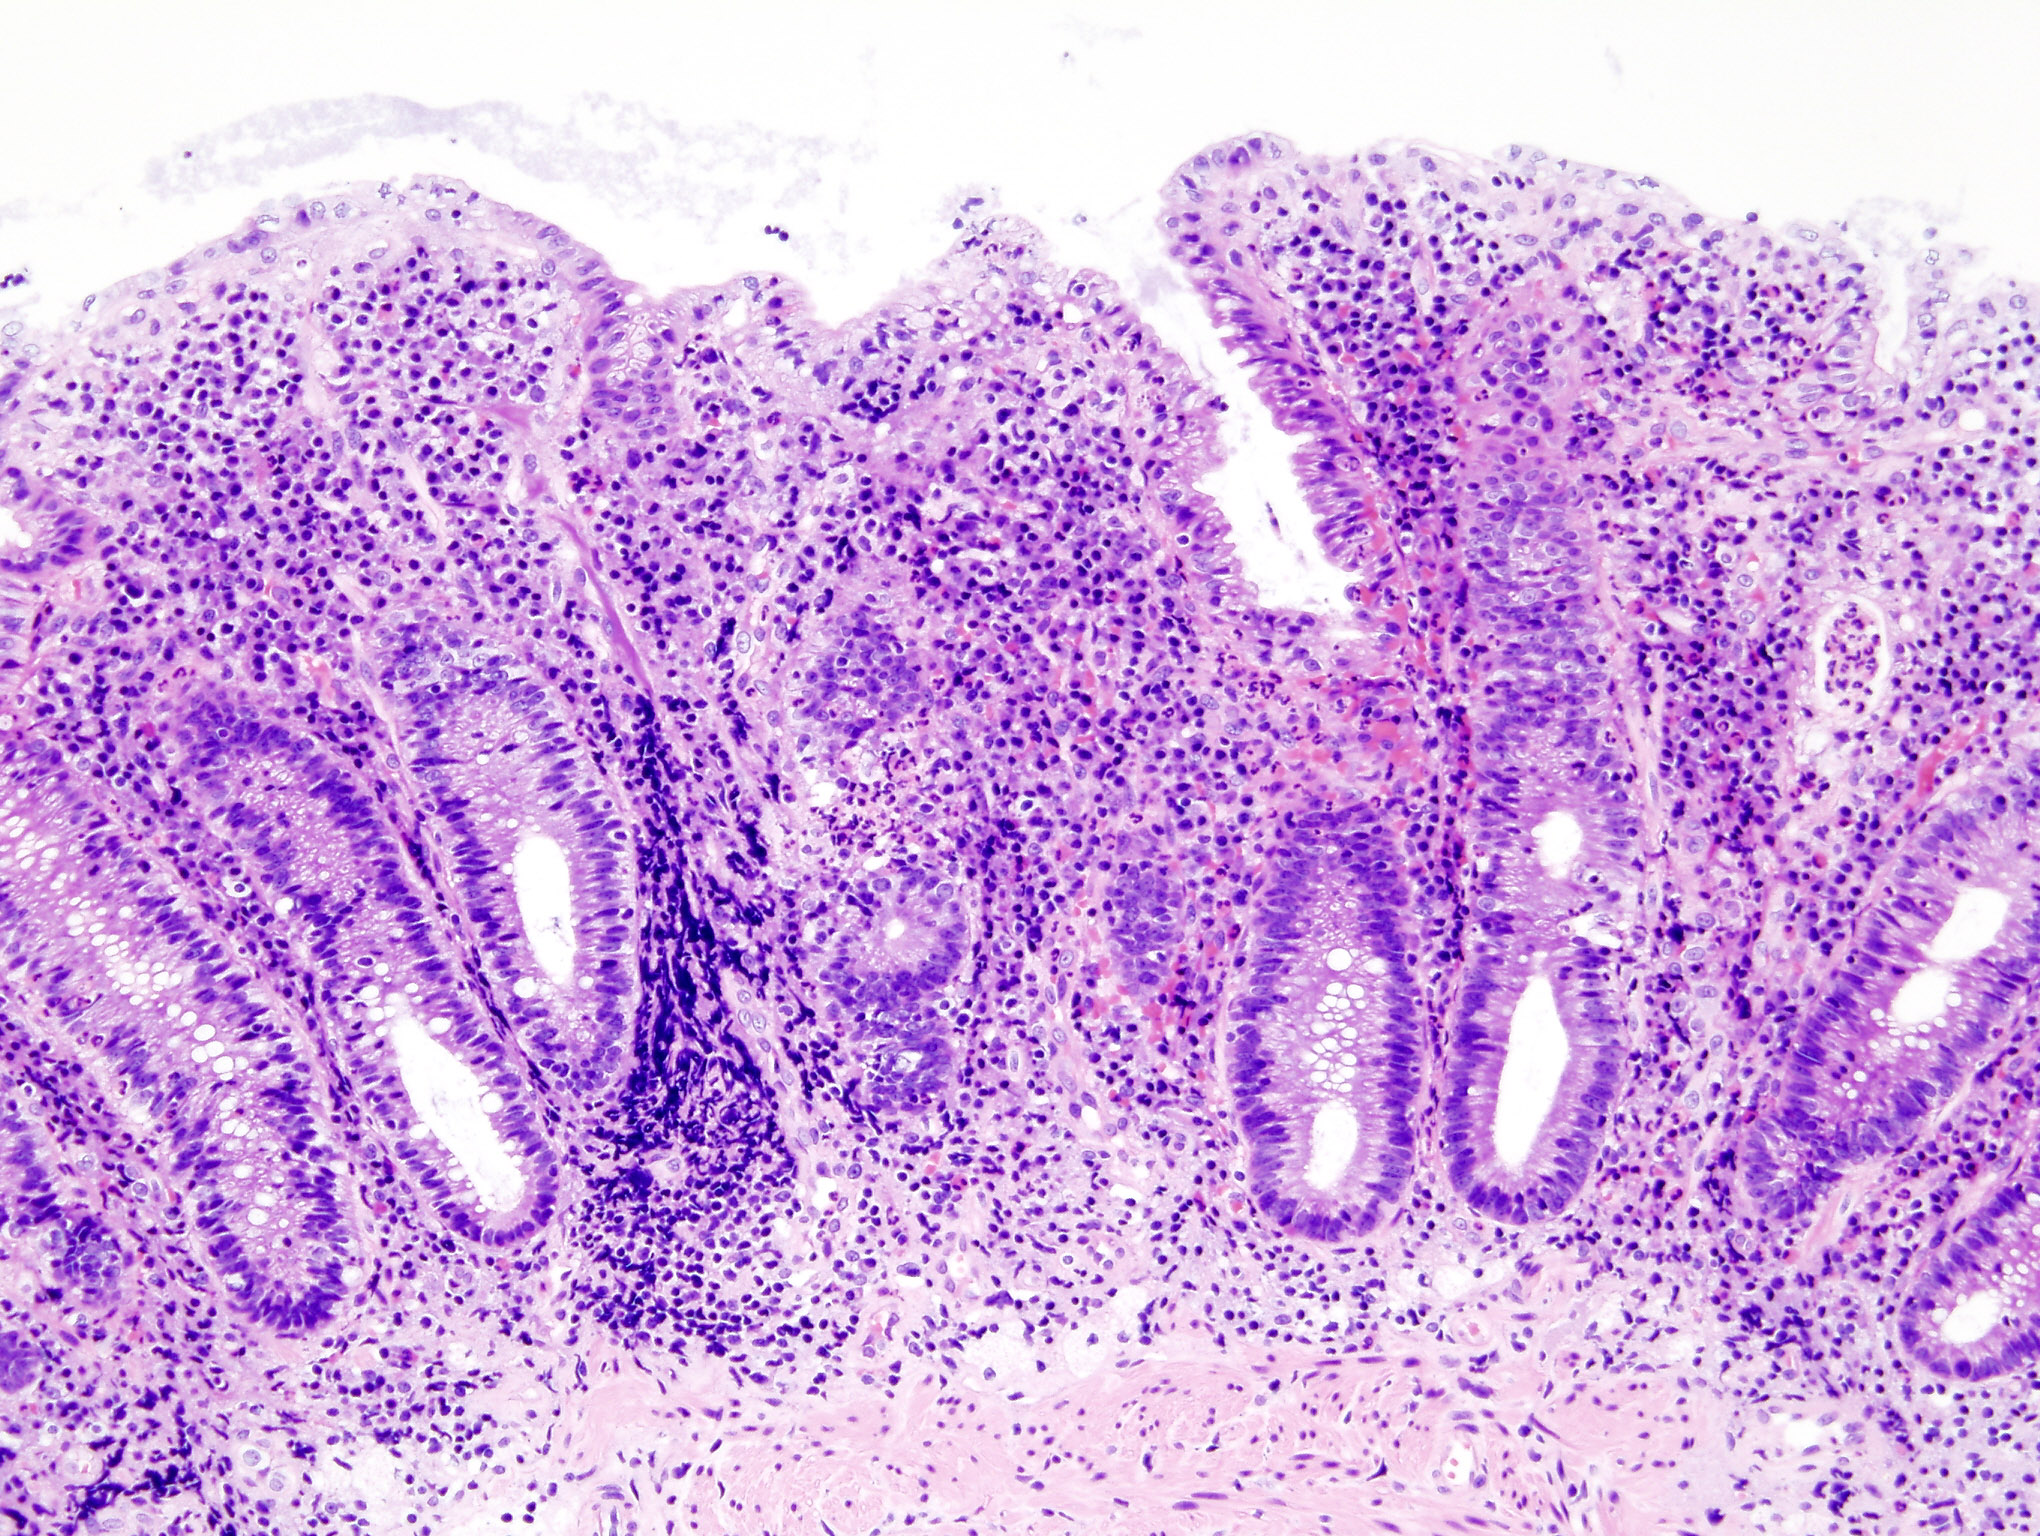 Ulcerative colitis. H&E stain showing marked lymphocytic infiltration (blue/purple) of the intestinal mucosa and distortion of the architecture of the crypts. [46]